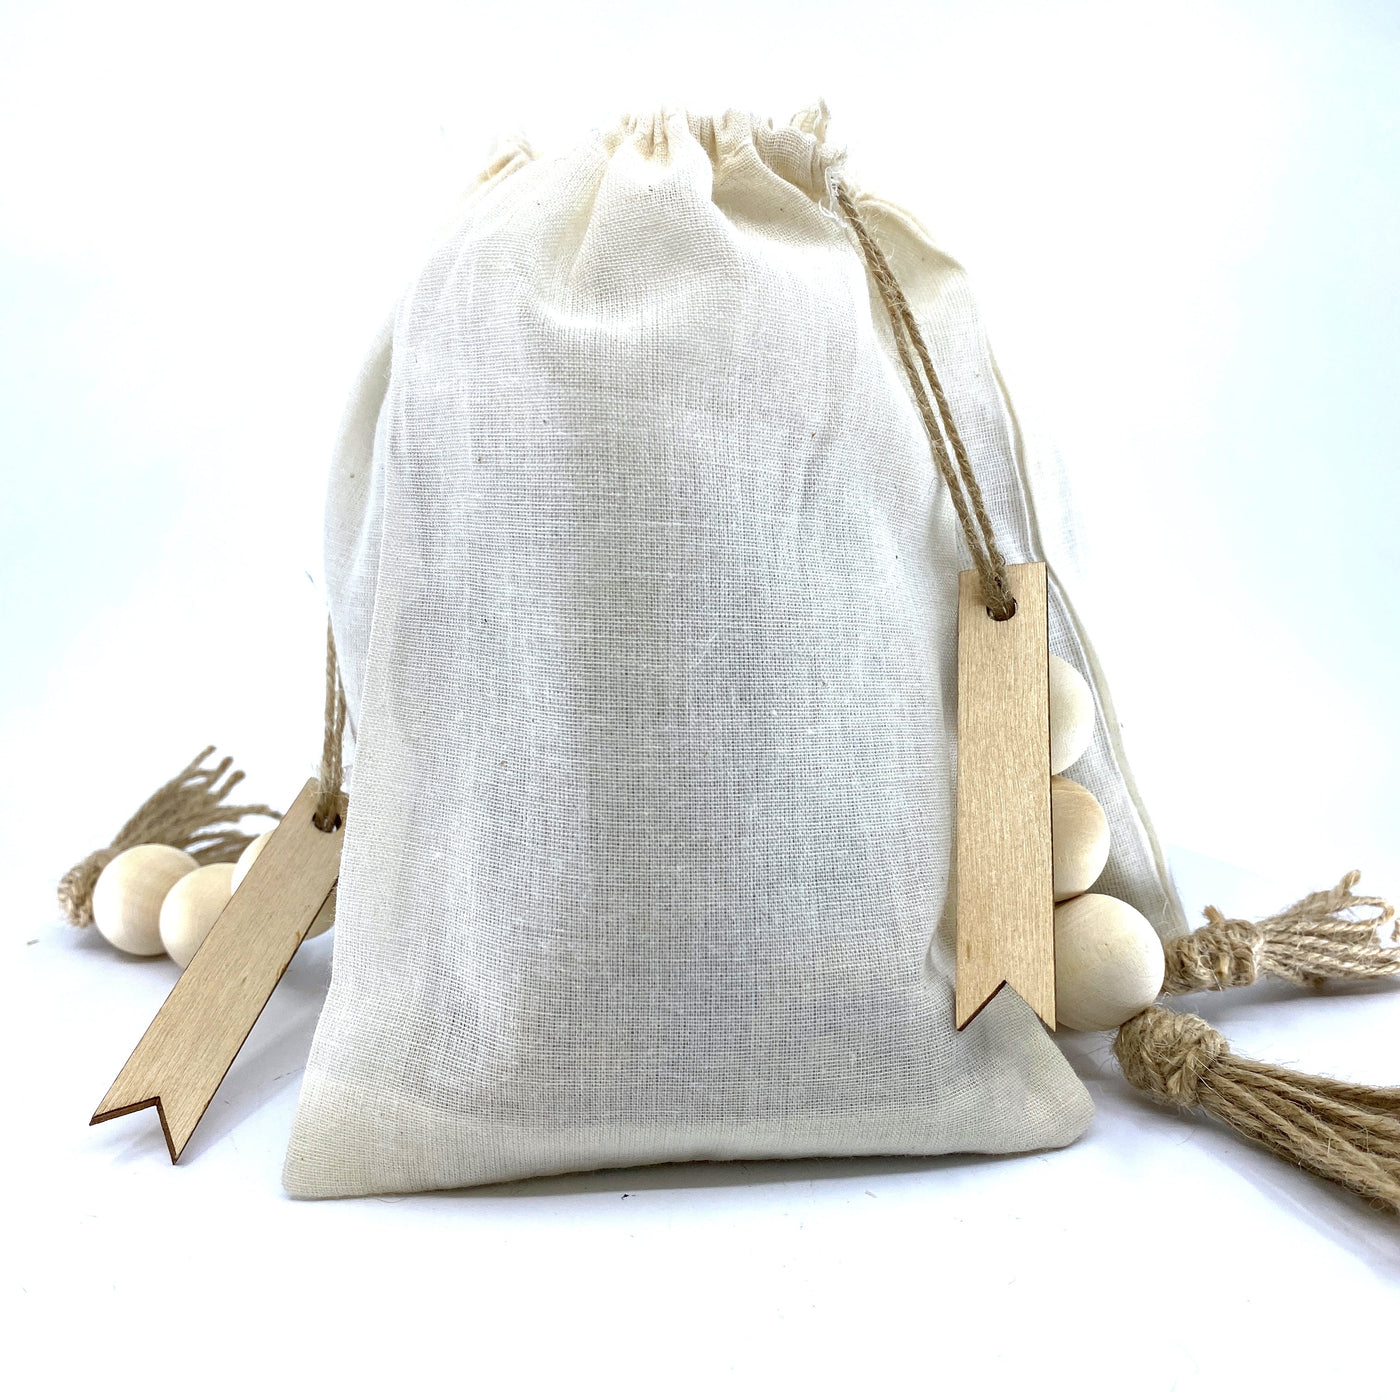 100% Naturally Dried Lavender Flowers, Jute & Wooden Beaded Drawstring Sack, 1/2 Oz